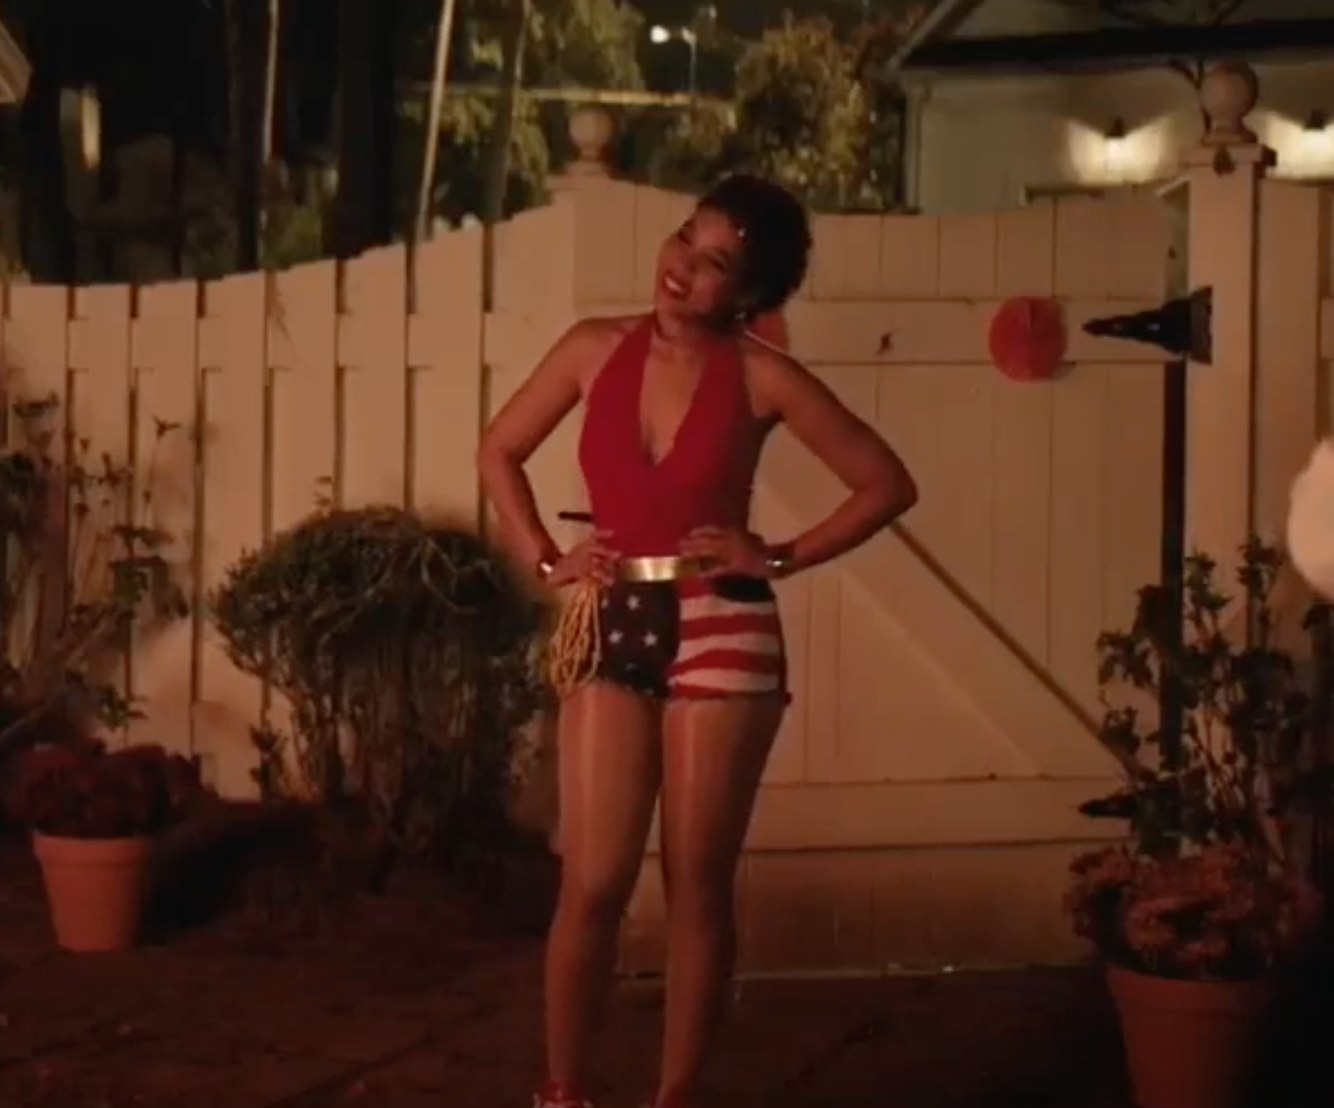 Abby in red top, american flag shorts, and wonder woman accessories